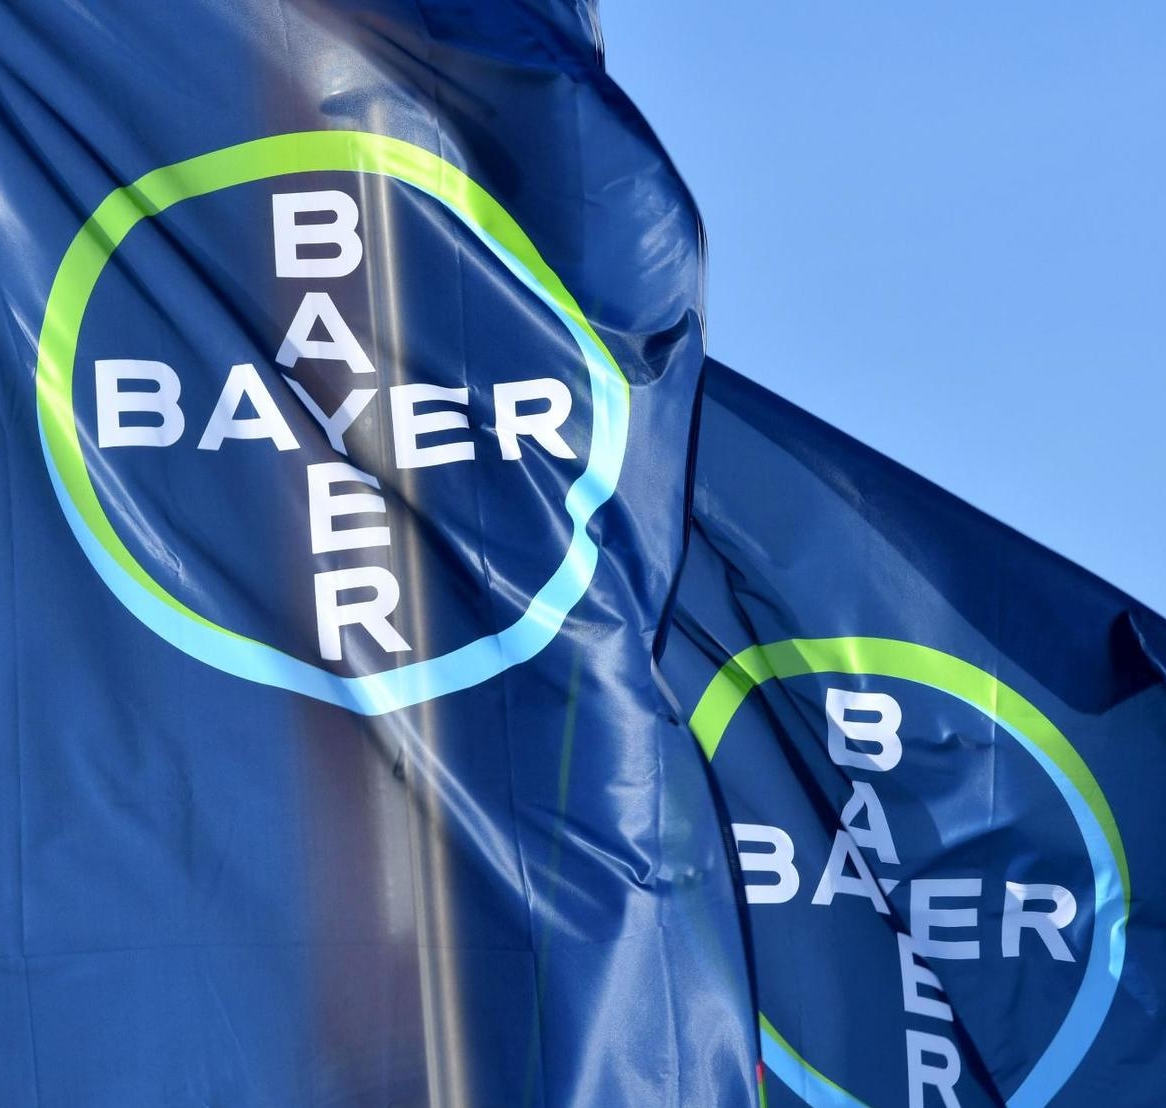 Bayer employer branding campaign strategy and concept. Bijan 2017.